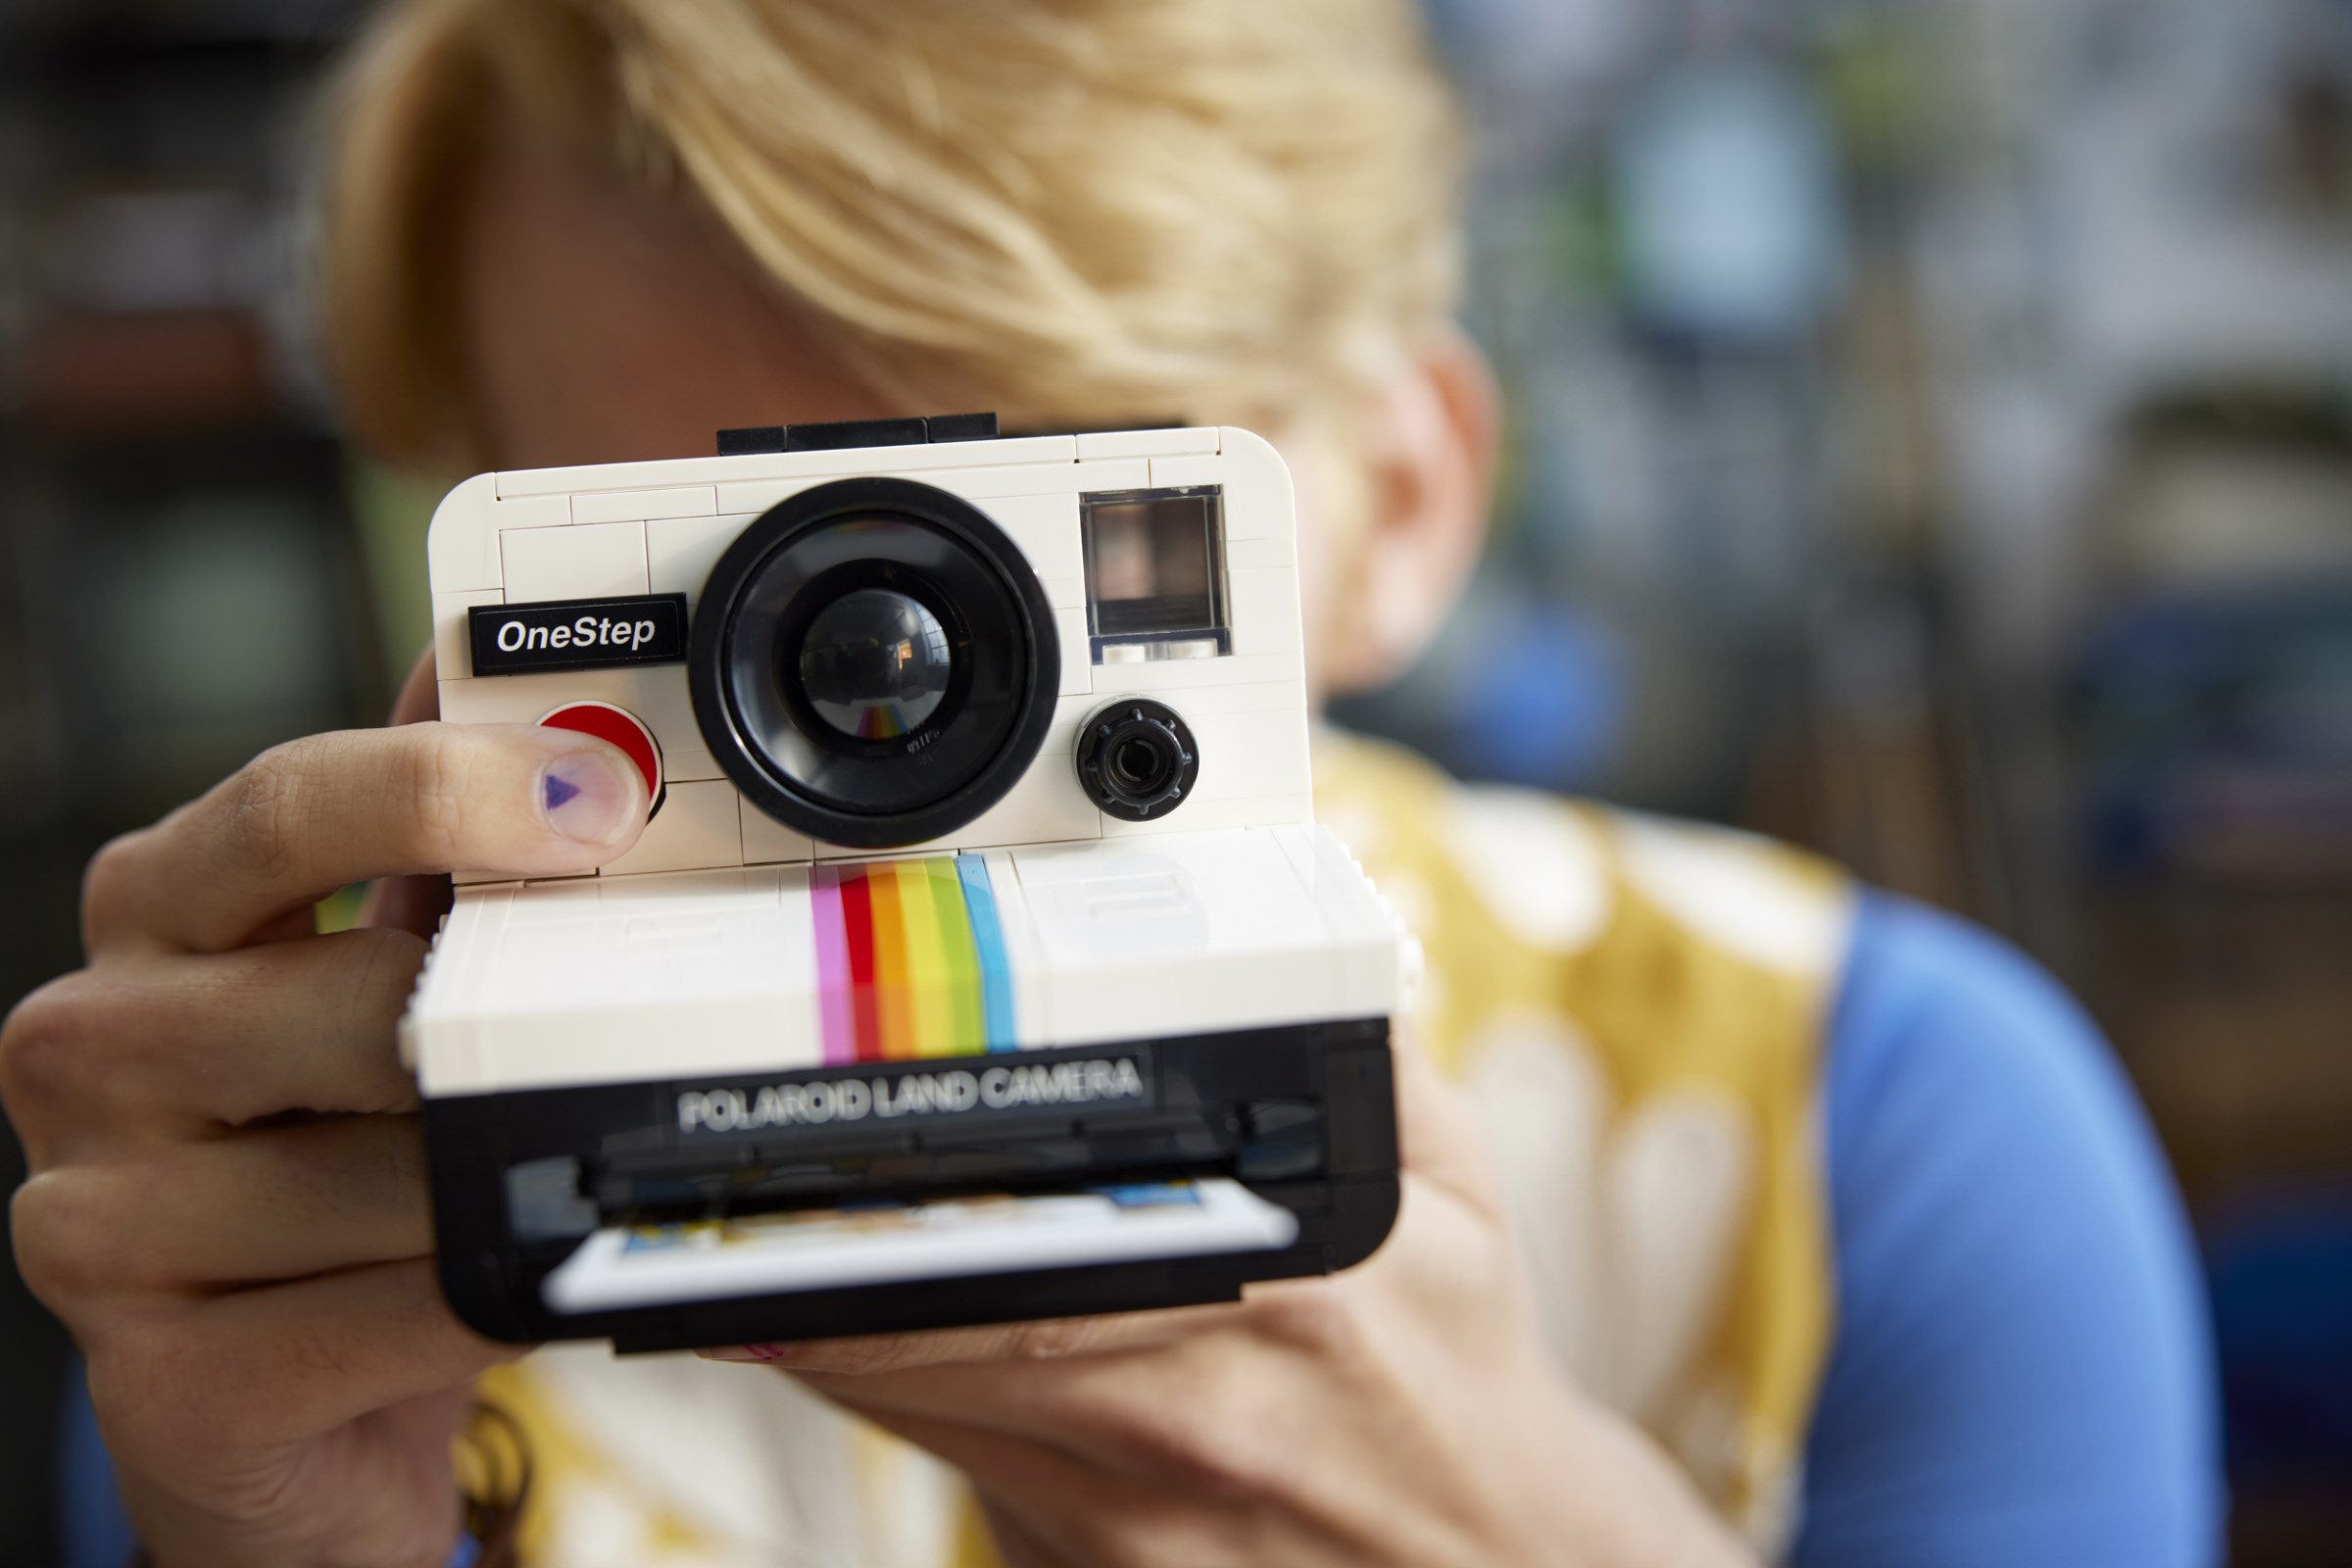 Picture this: Lego's working on a Polaroid replica - The Verge